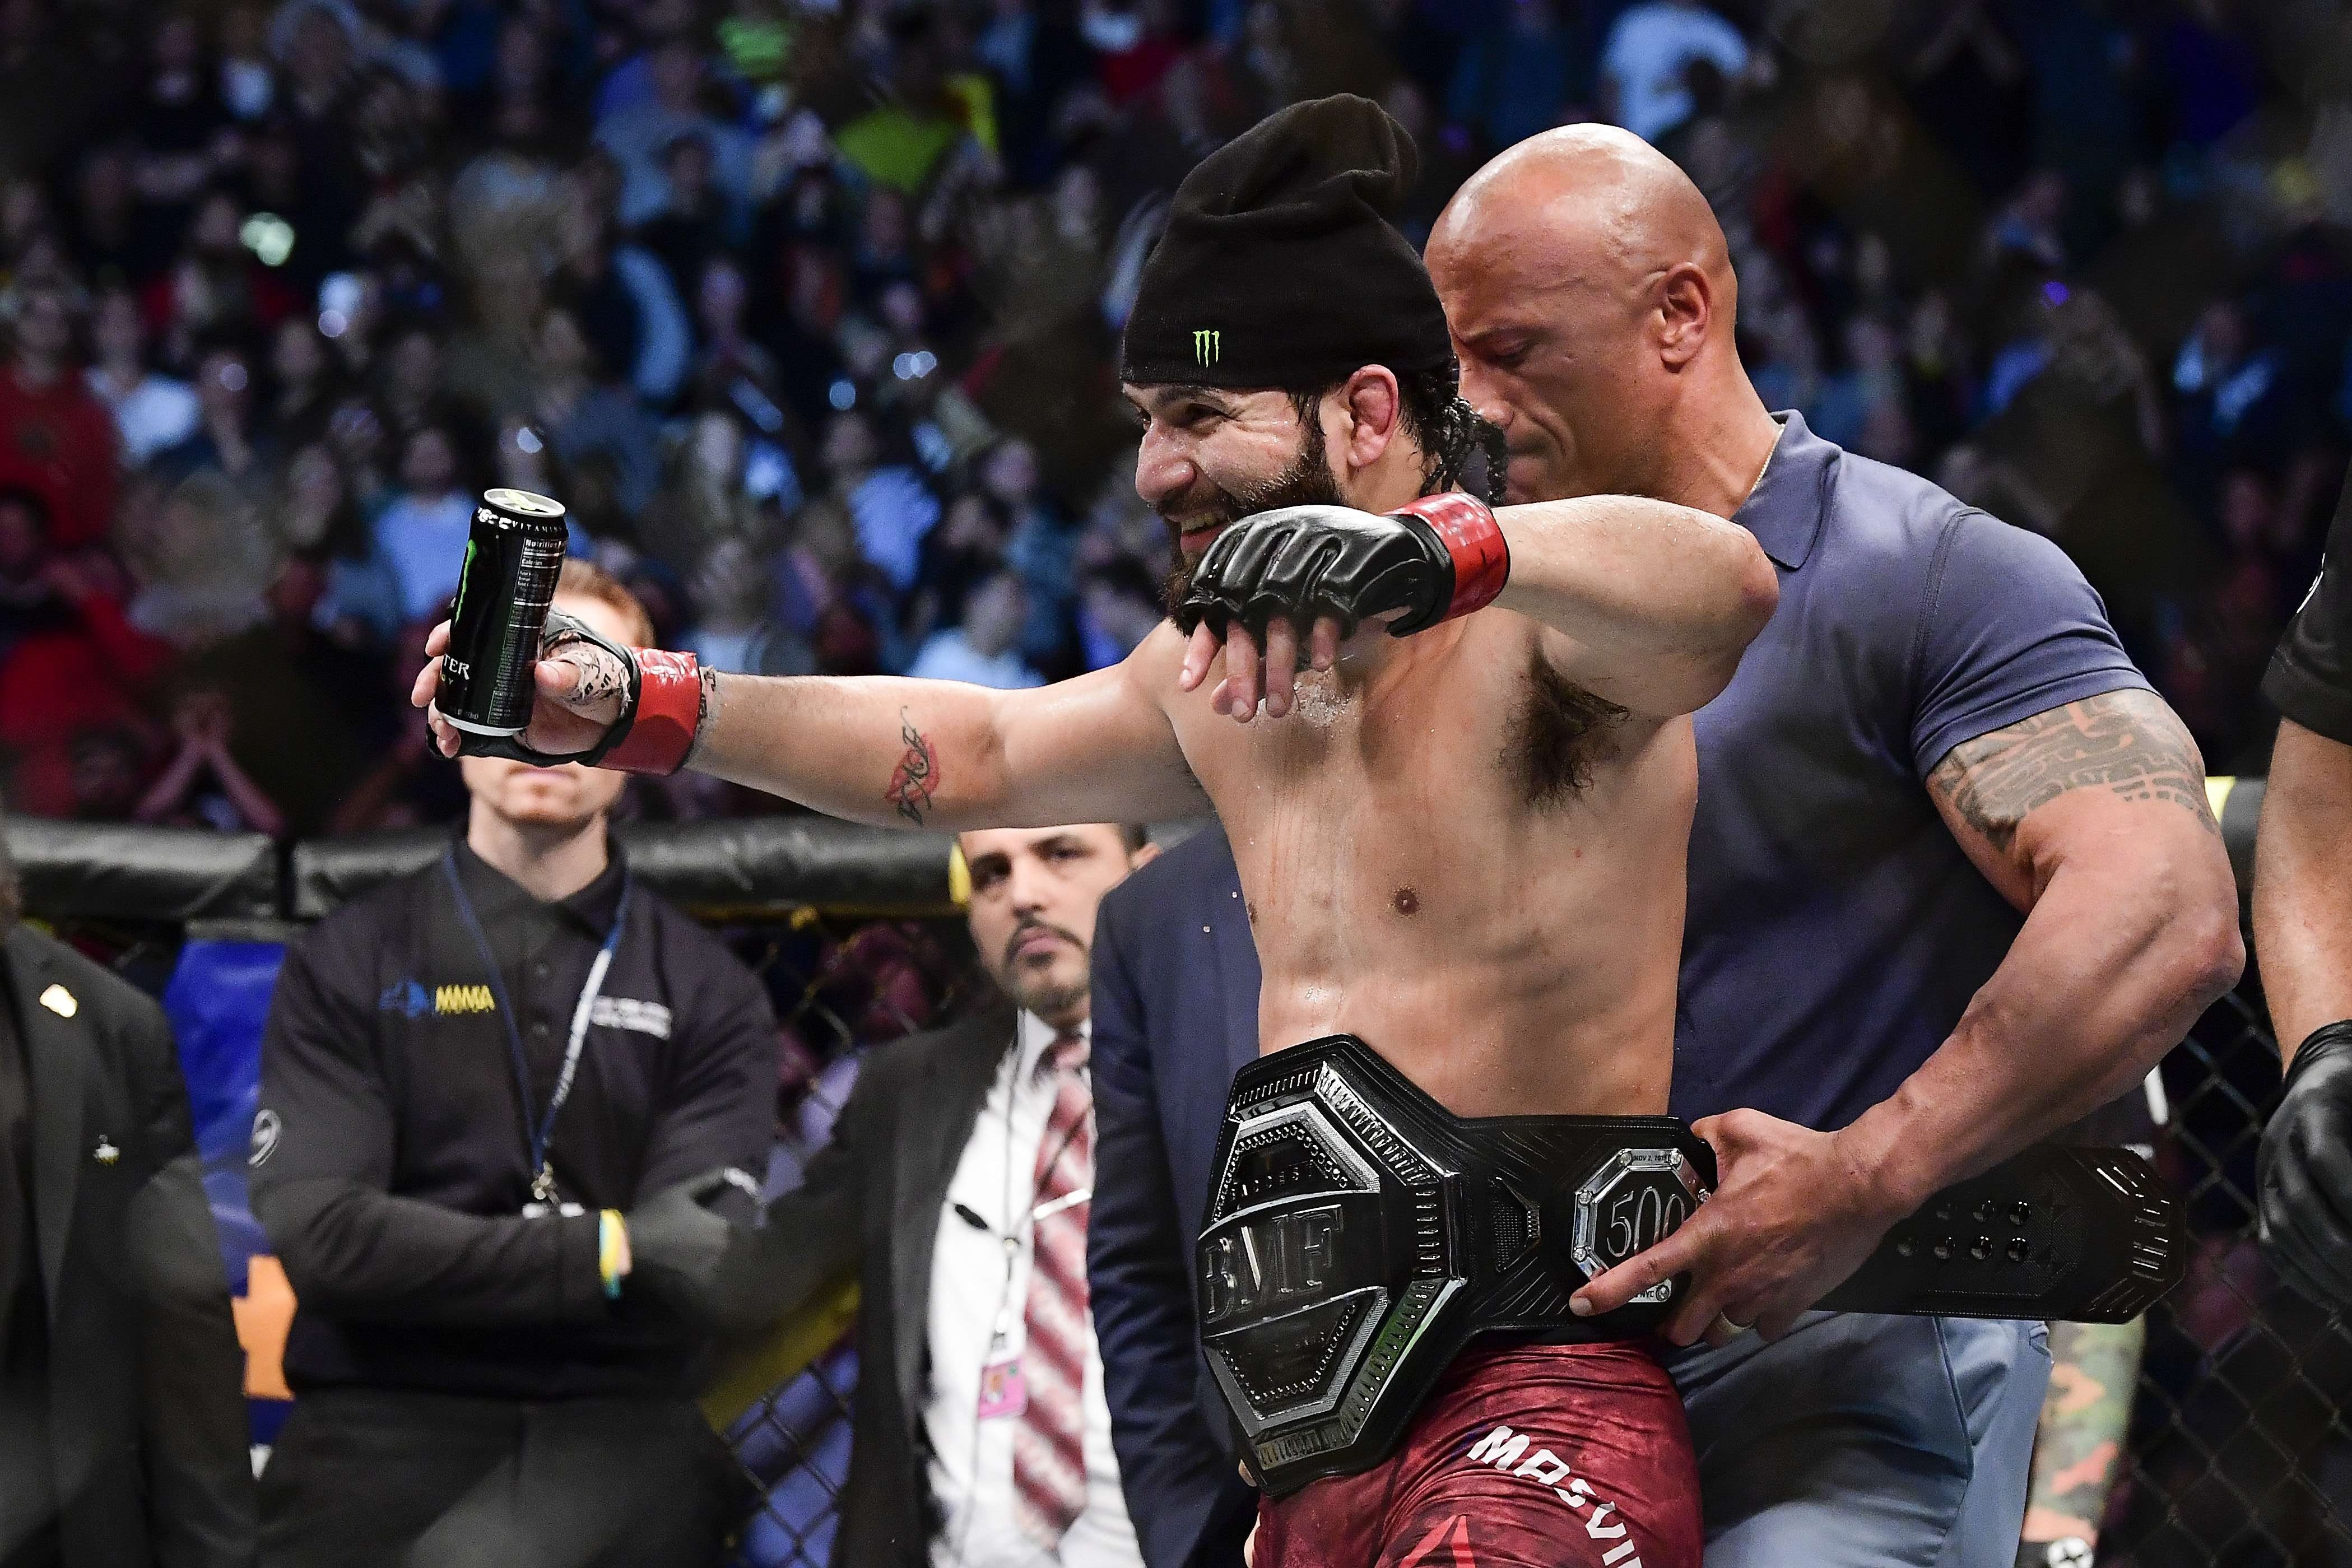 Jorge Masvidal is awarded the ‘BMF’ belt by Dwayne ‘The Rock’ Johnson at UFC 244. Photo: AFP